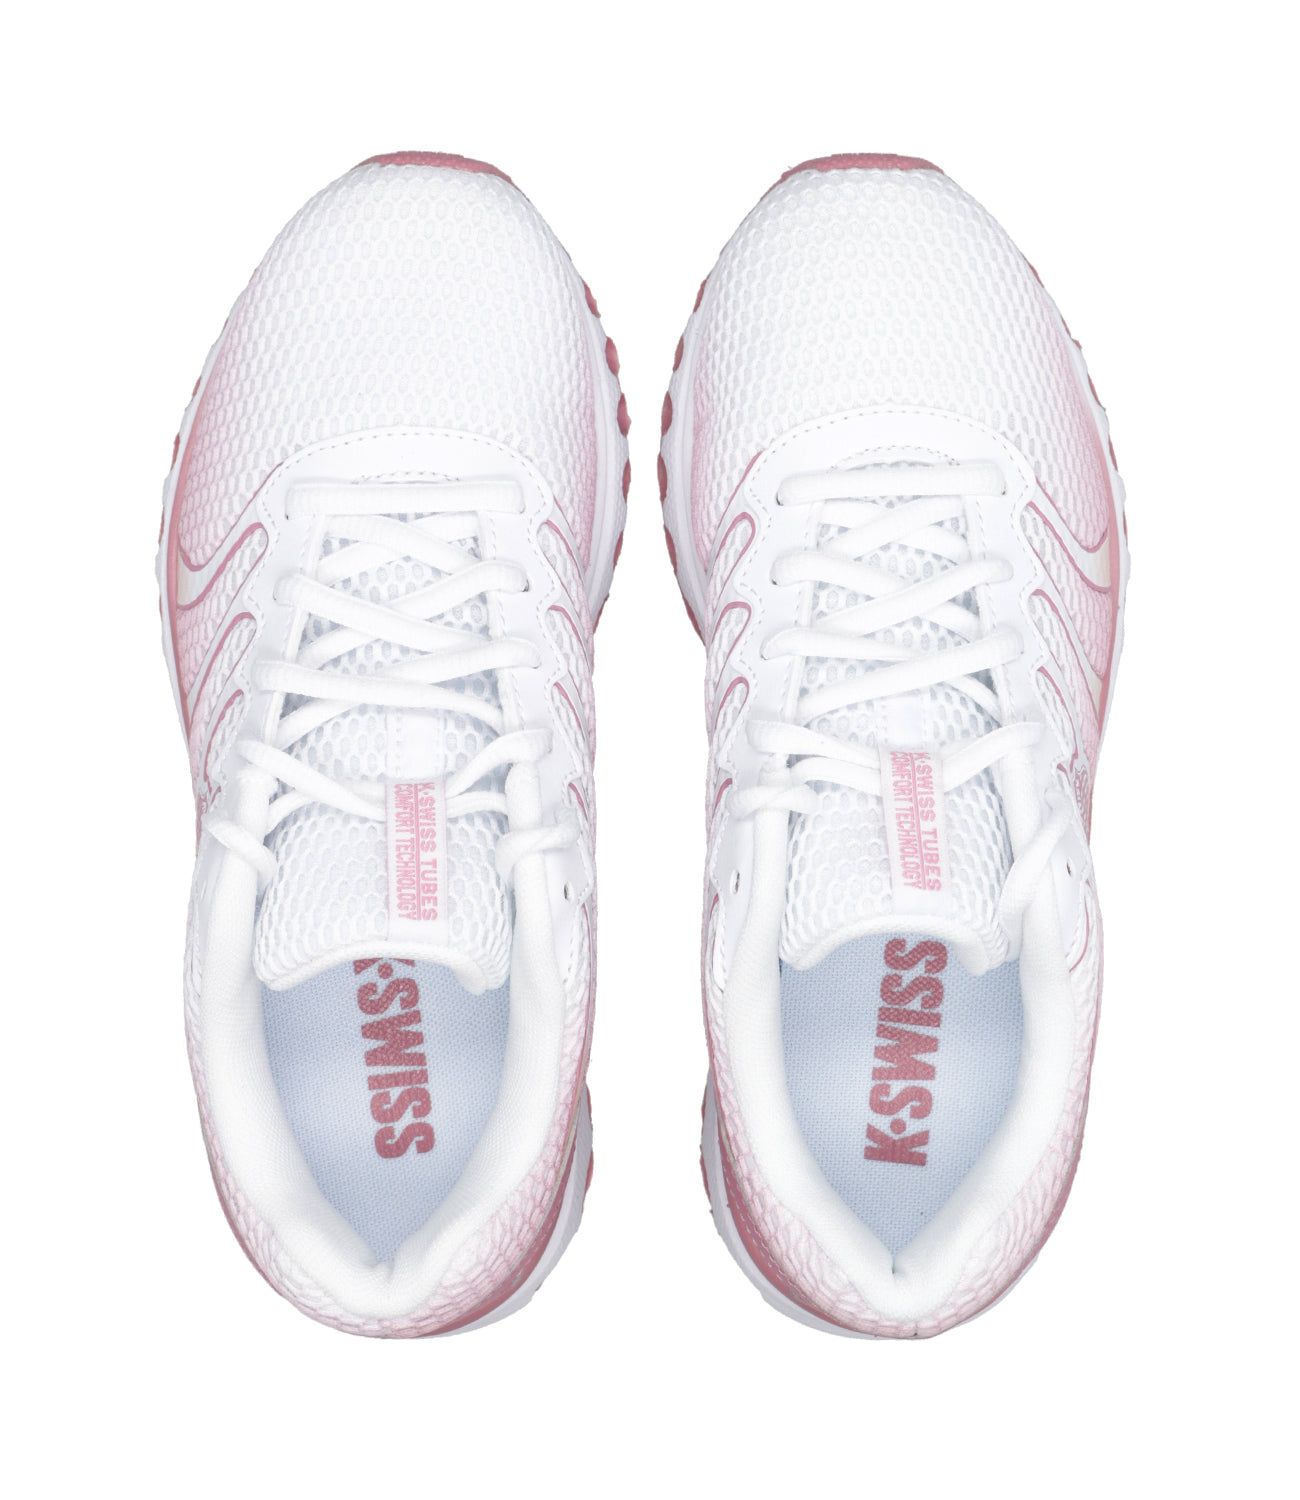 K-Swiss | Tubes 200 White and Apricot Sneakers